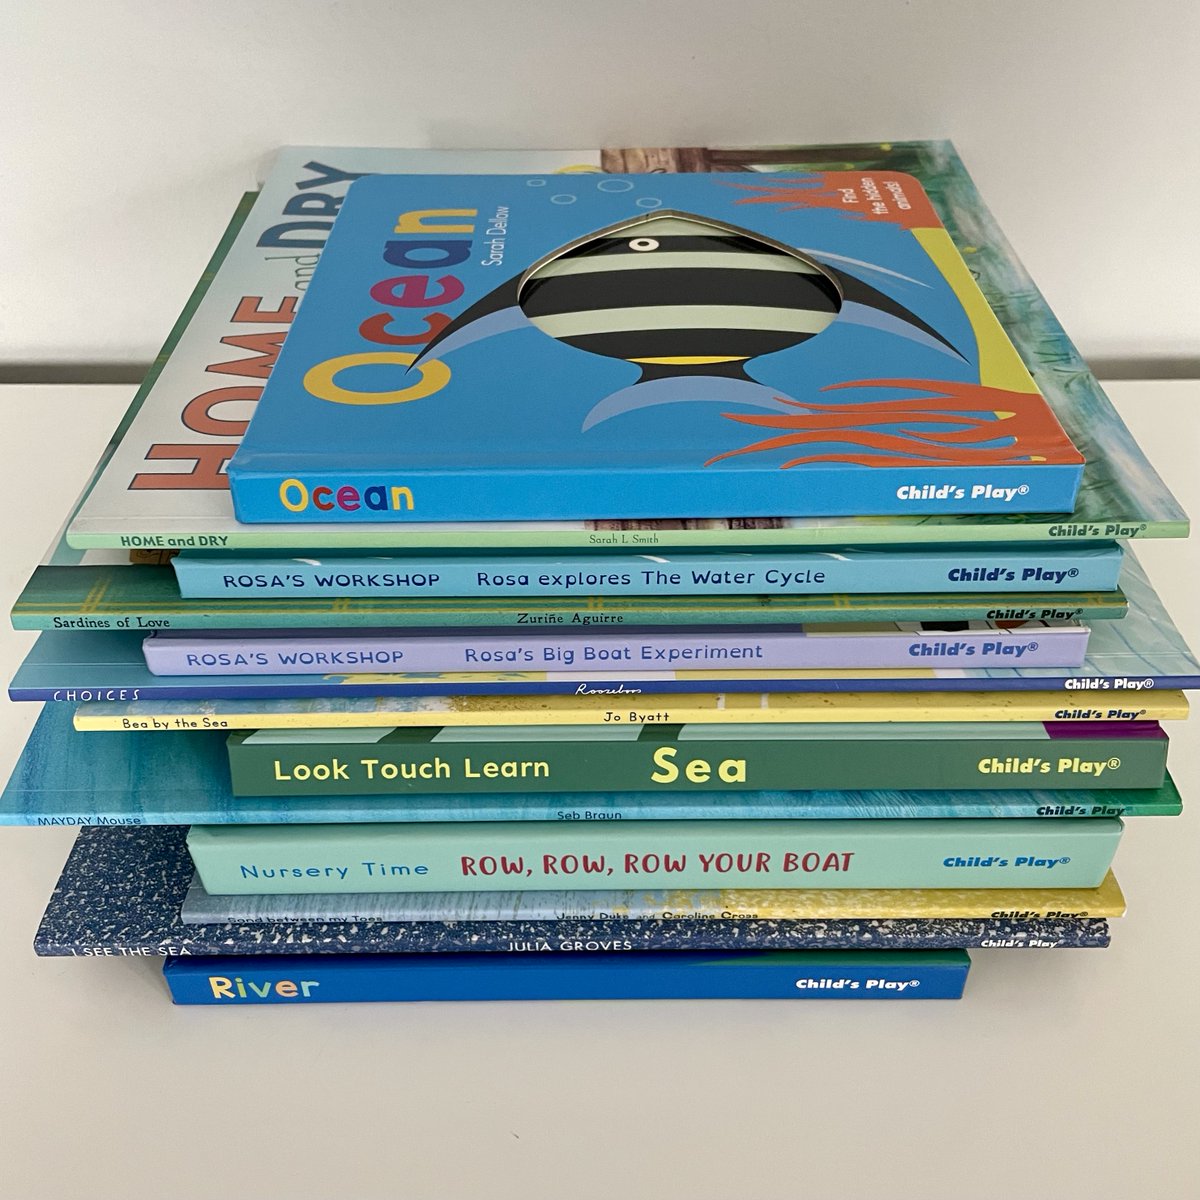 Themed story times are a gentle and fun way to introduce new topics, encourage discussion and ideas. #WorldWaterDay Free activities to download, teaching resources, reading tips + more: childs-play.com #WaterAction #STEMkids #storytime #learningthroughplay